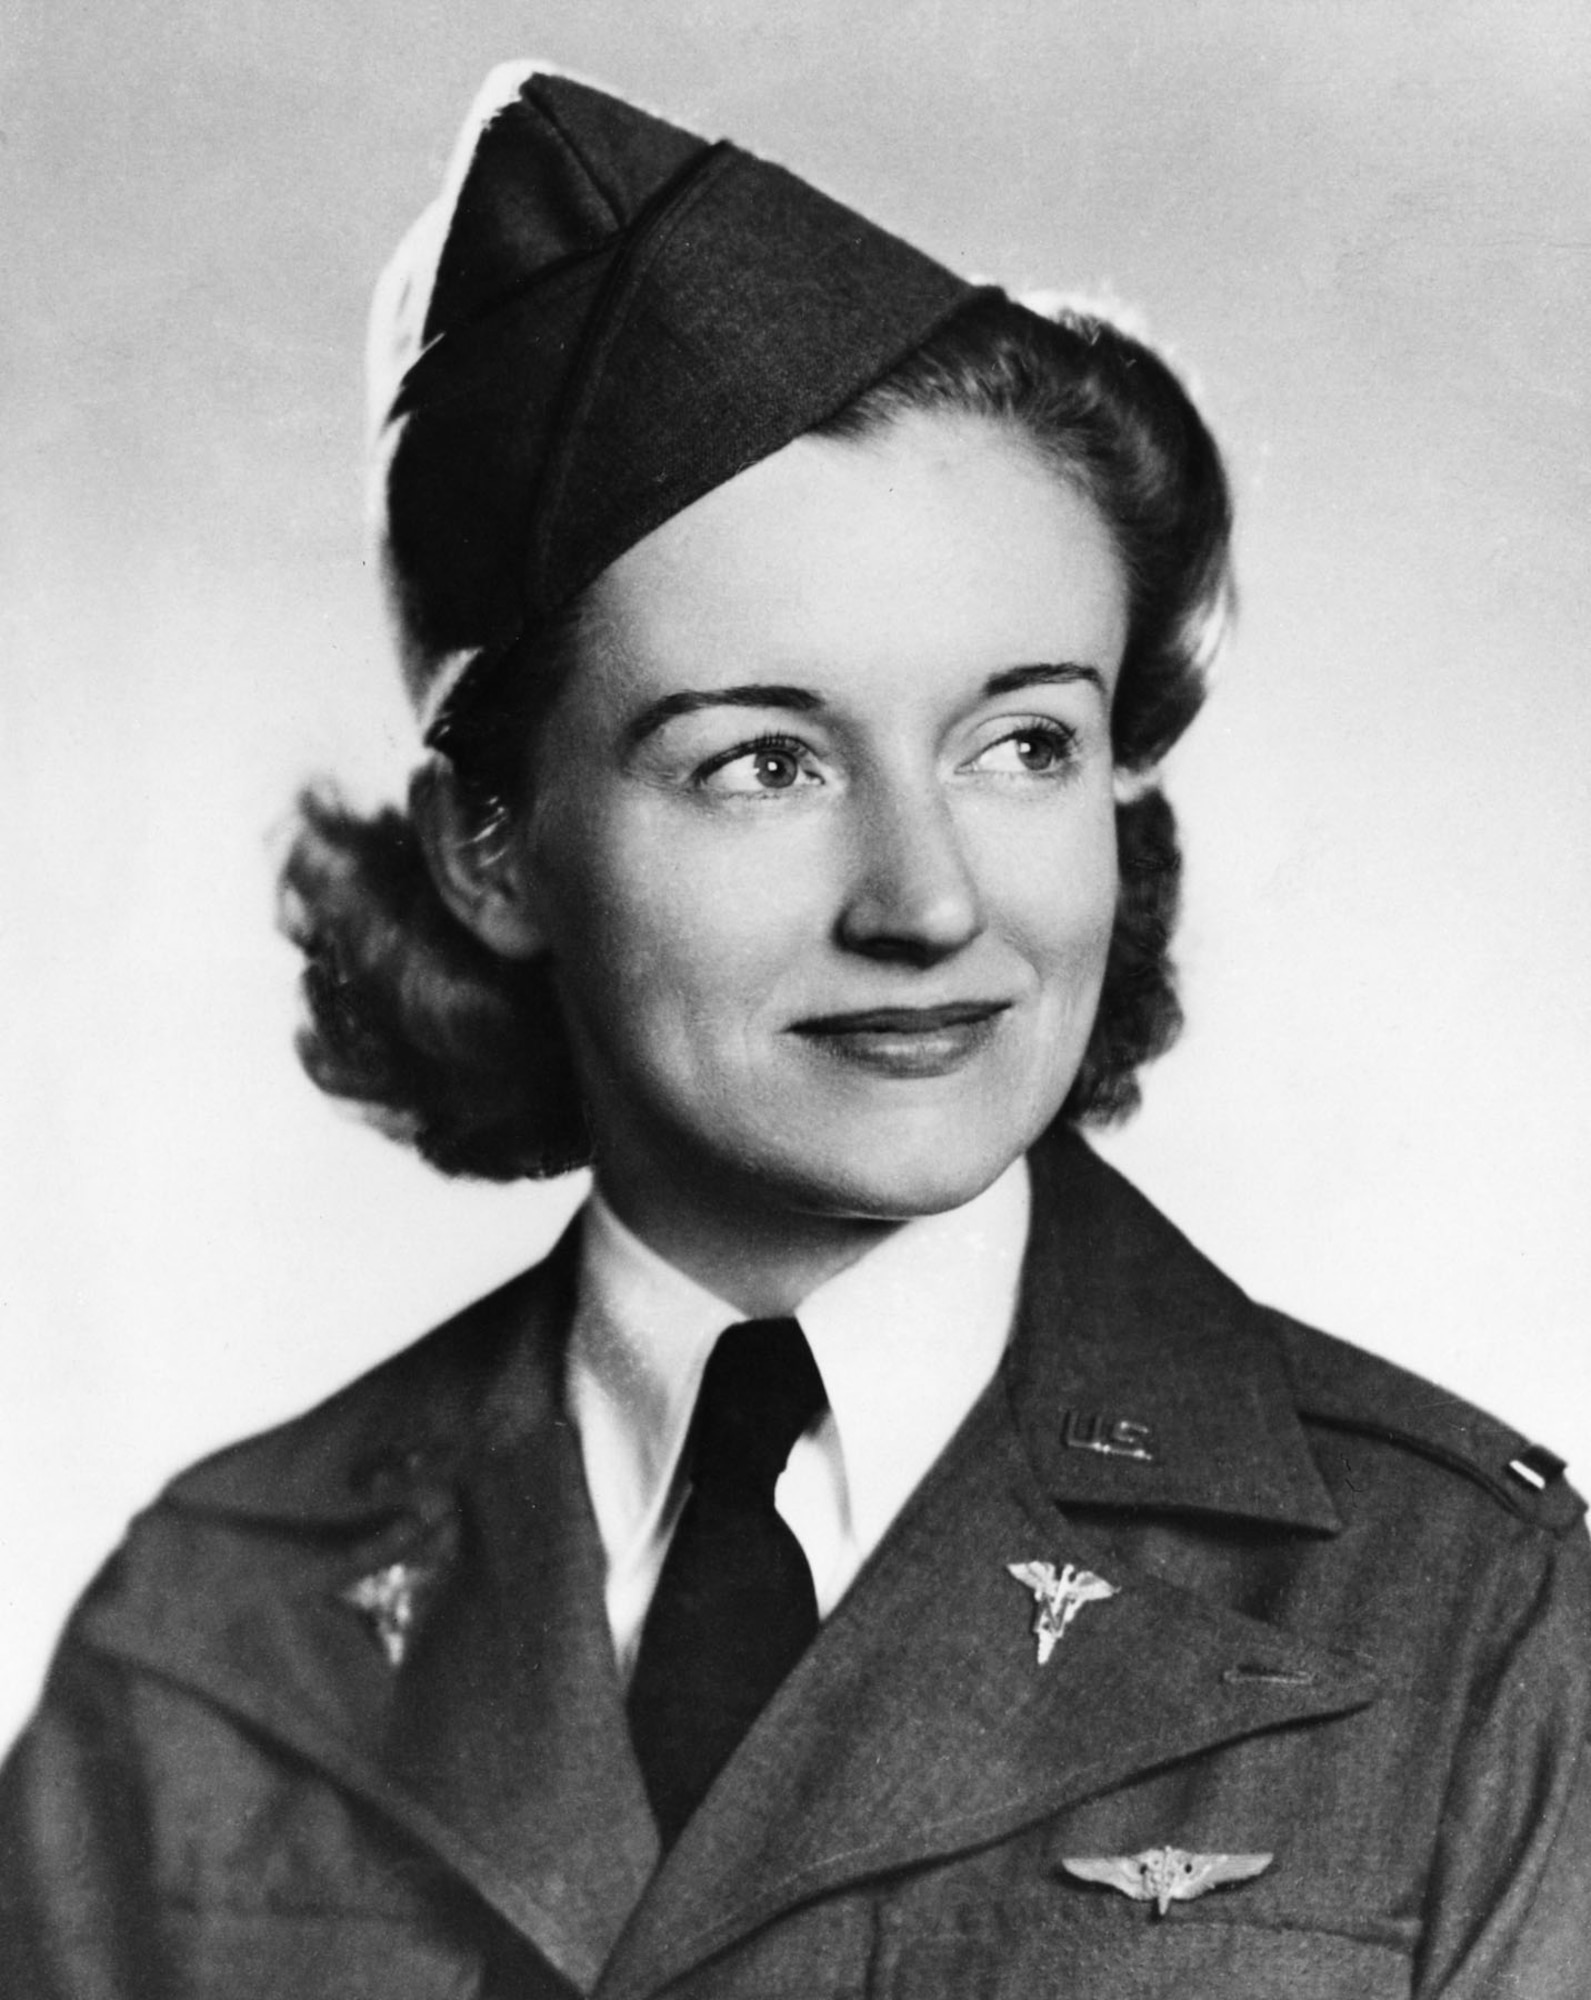 In July 1943, 2nd Lt. Ruth M. Gardiner died in an aircraft crash en route to evacuating patients in Alaska. She was the first USAAF flight nurse killed in a combat theater. (U.S. Air Force photo)